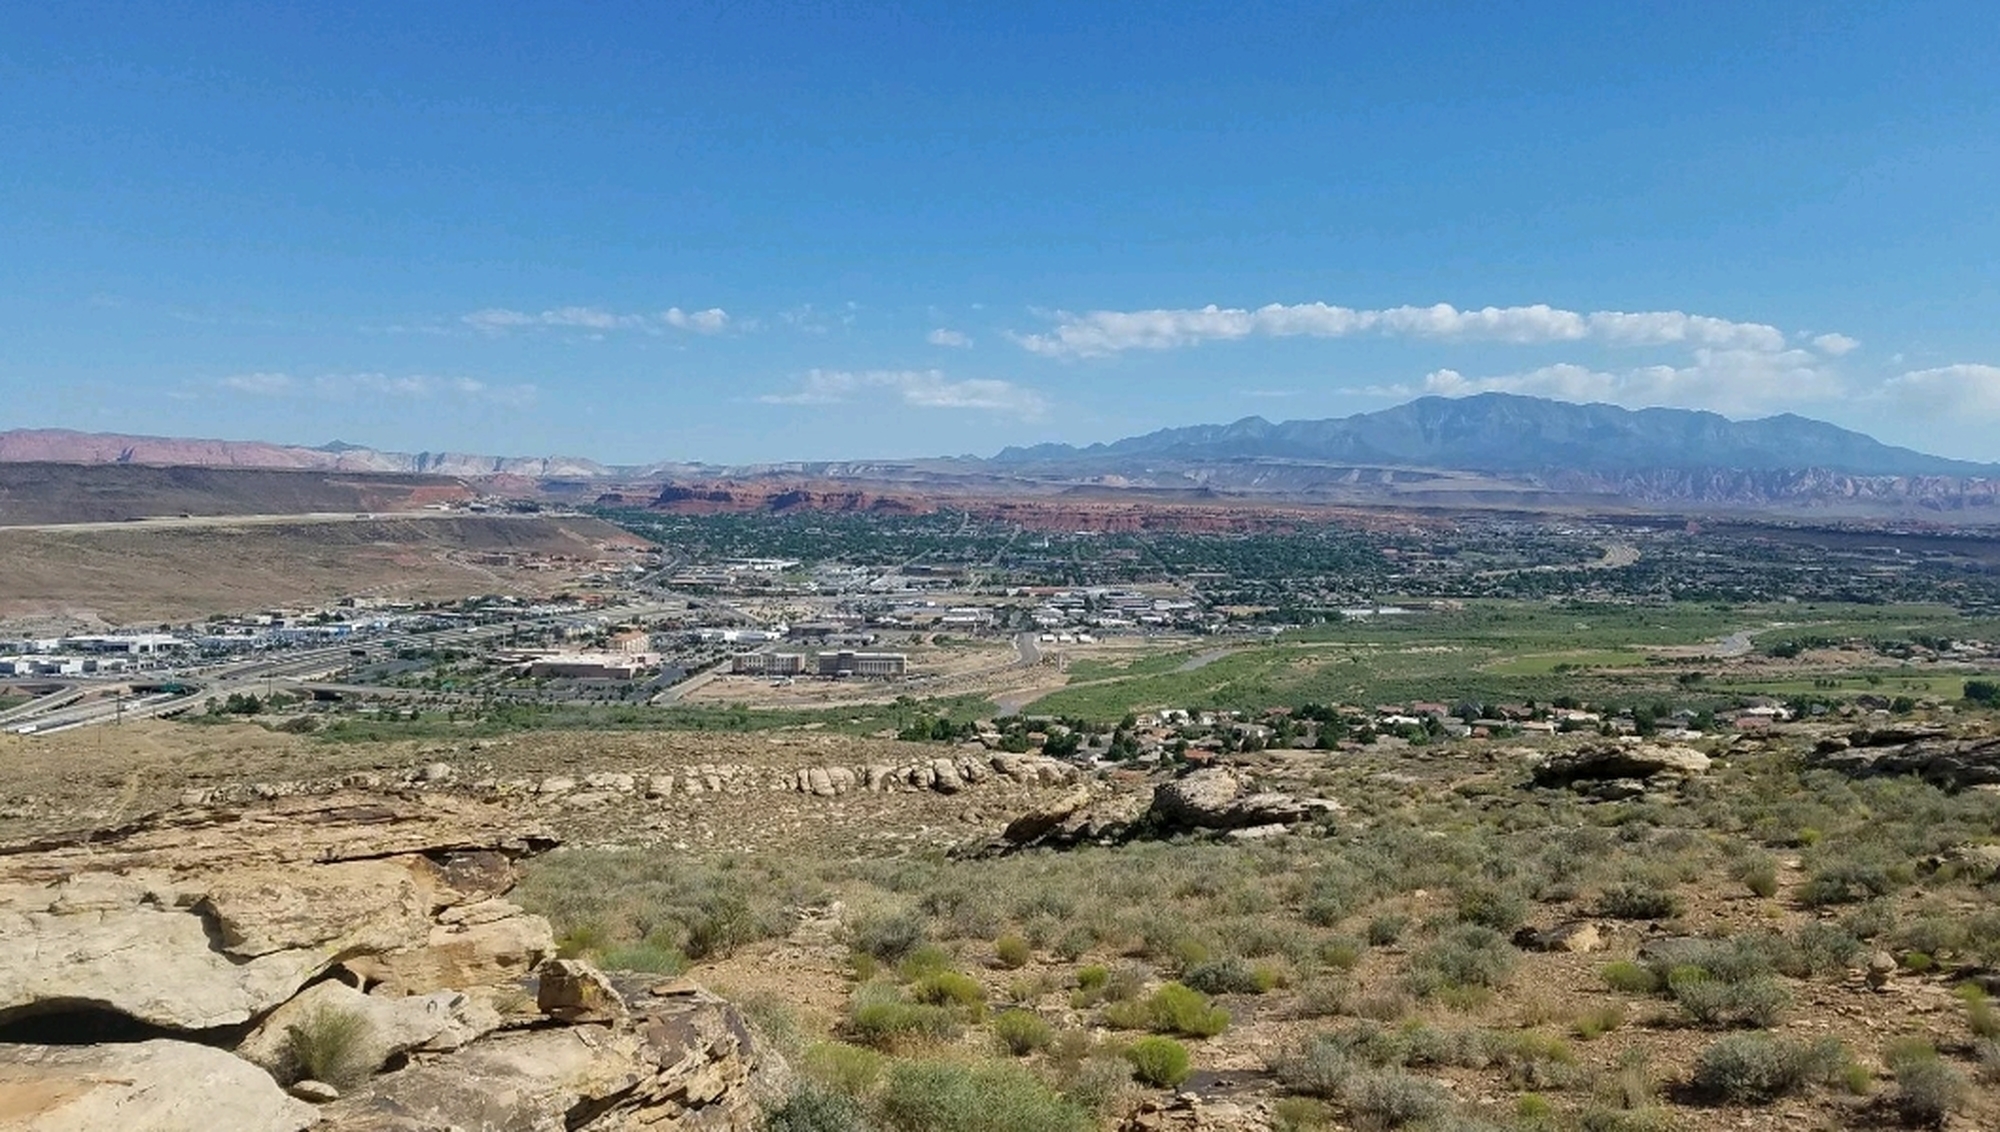 Enjoy an expansive overlook of St. George and Pine Valley ...